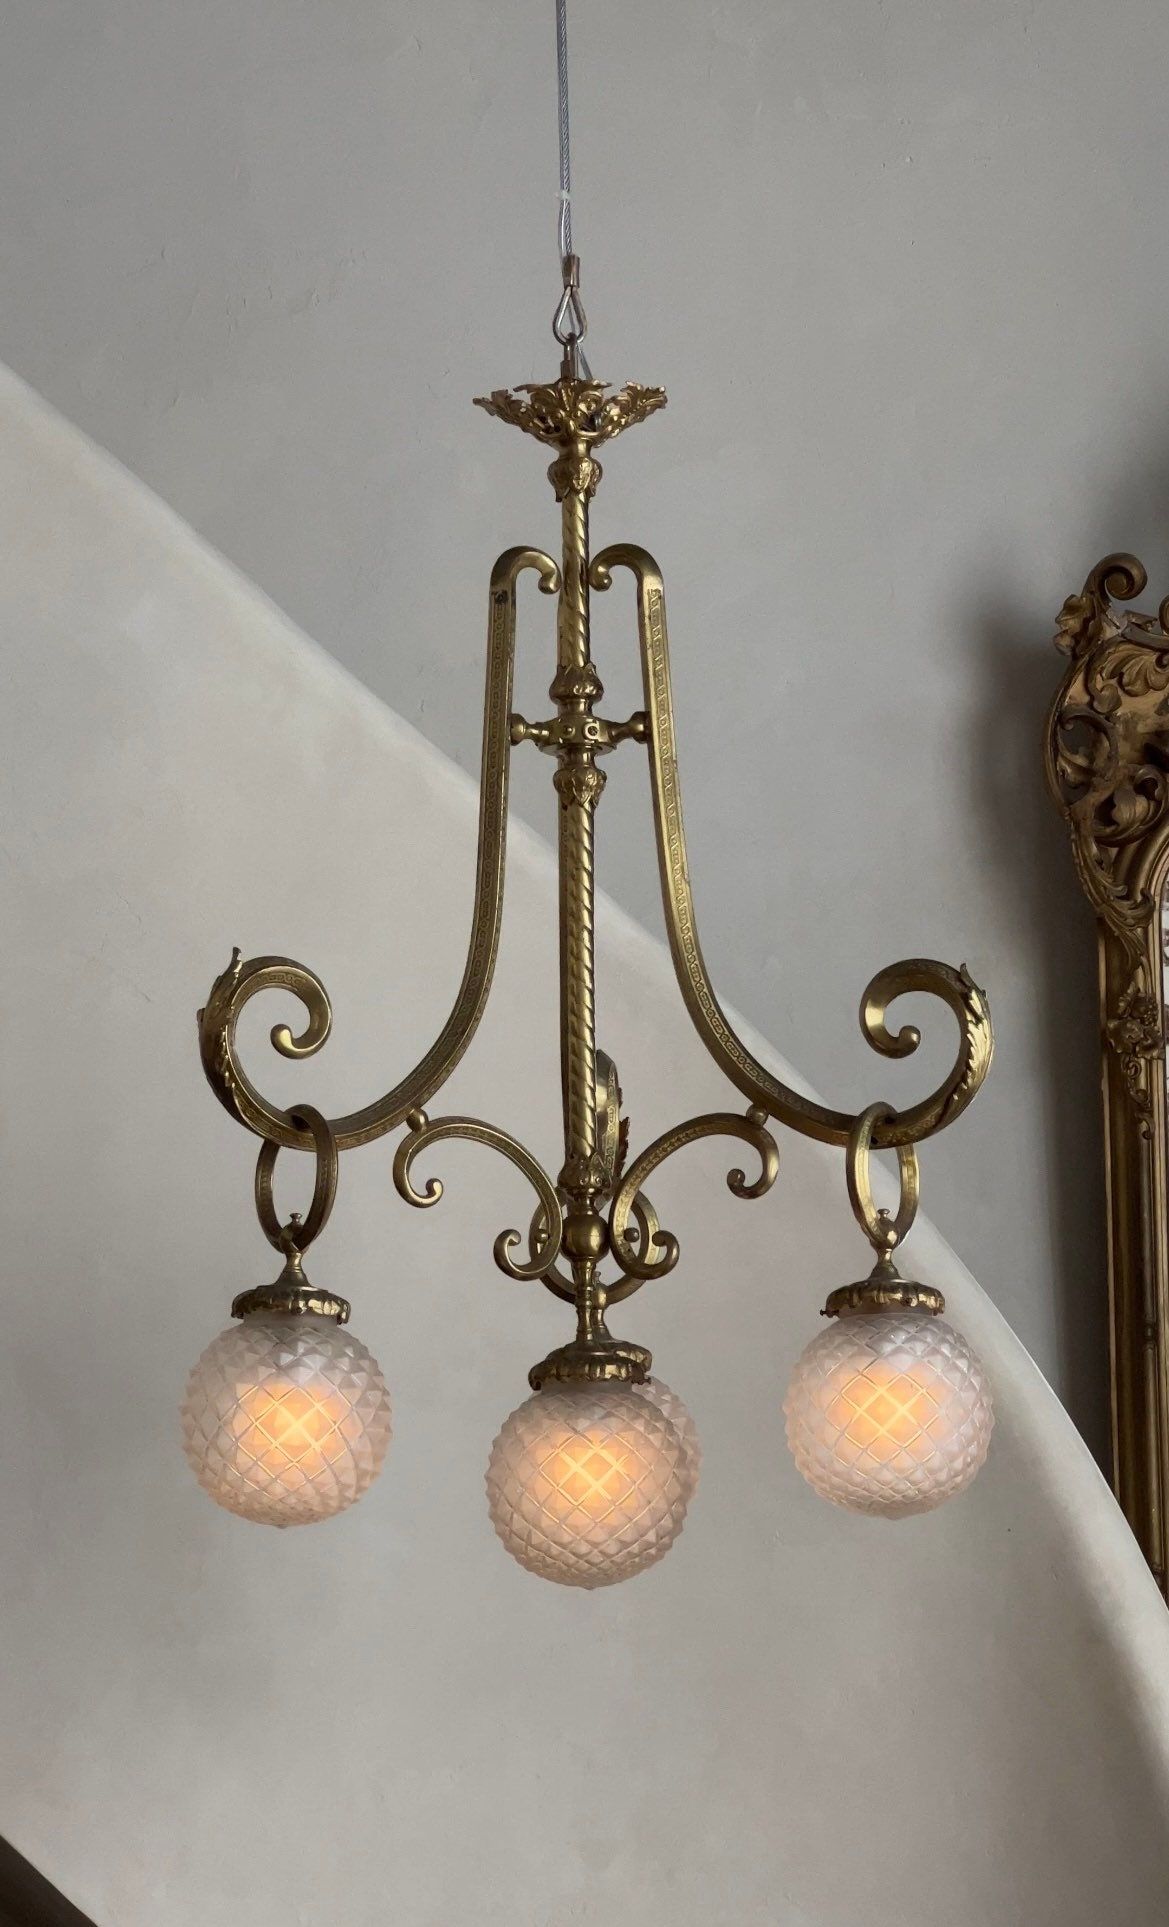 Traditional Brass Chandeliers A Classic Lighting Option for Any Home